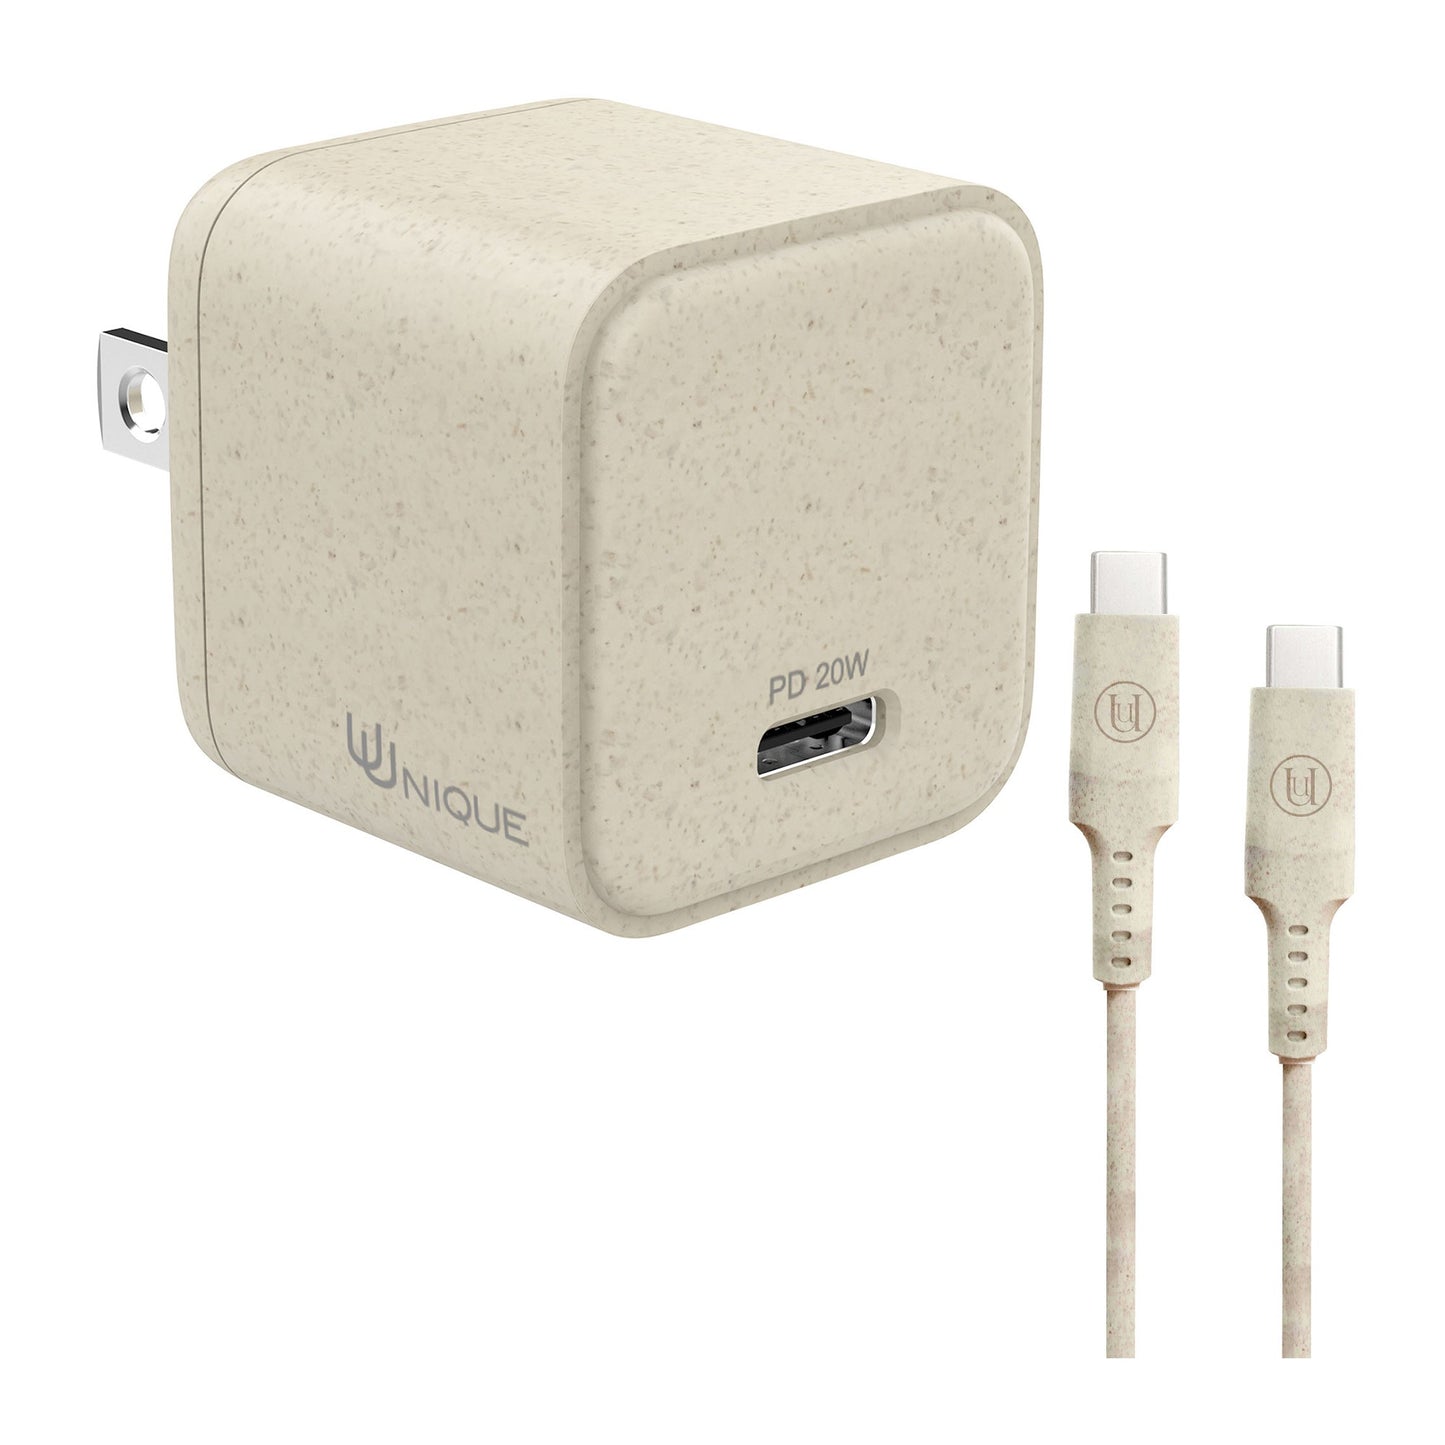 Uunique 20W PD Eco USB-C to USB-C Charger - White - 15-09761